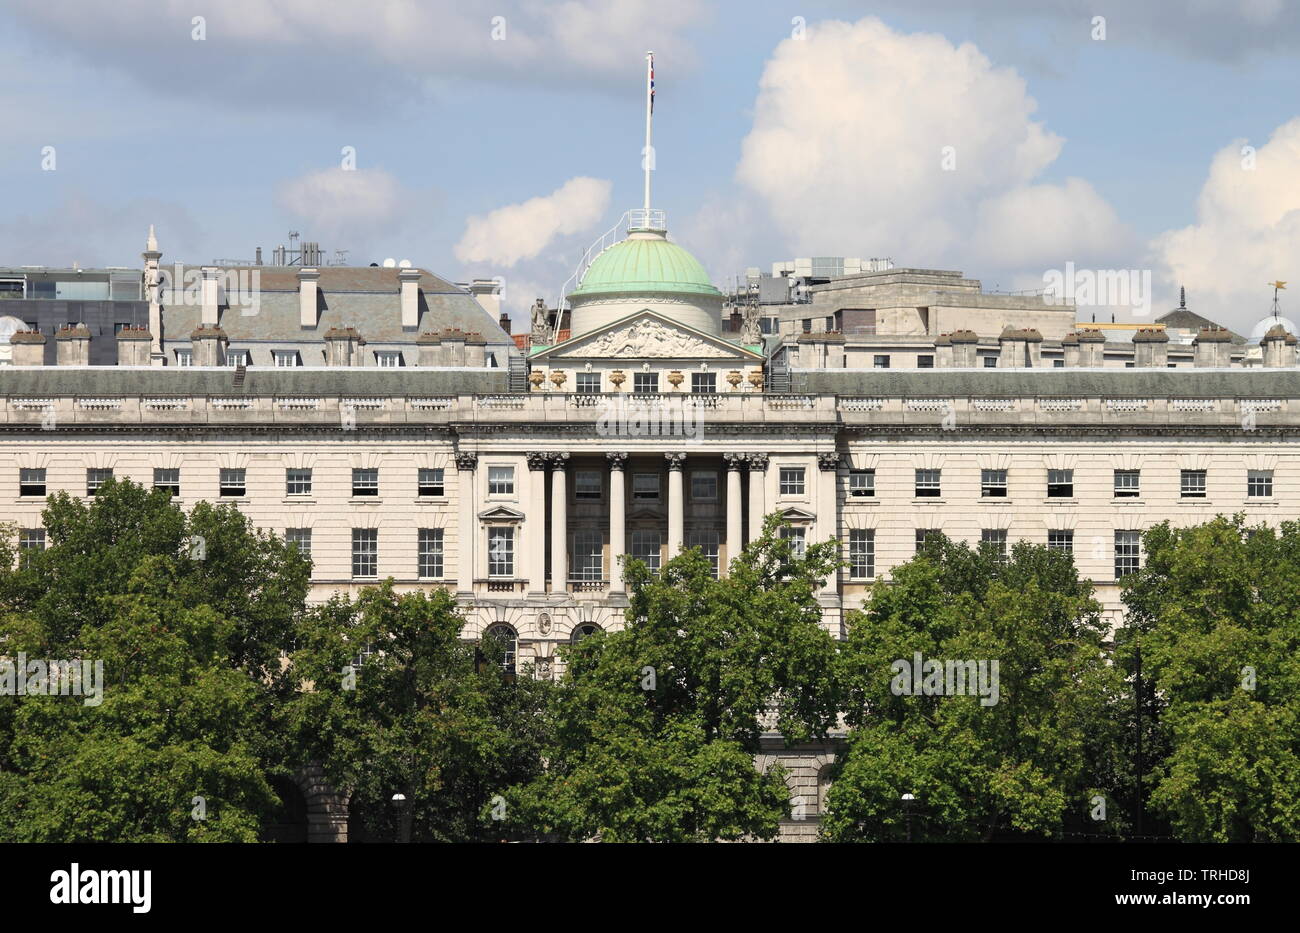 Facade of Somerset House, a prominent neoclassical landmark building on the banks of the River Thames. London, UK Stock Photo